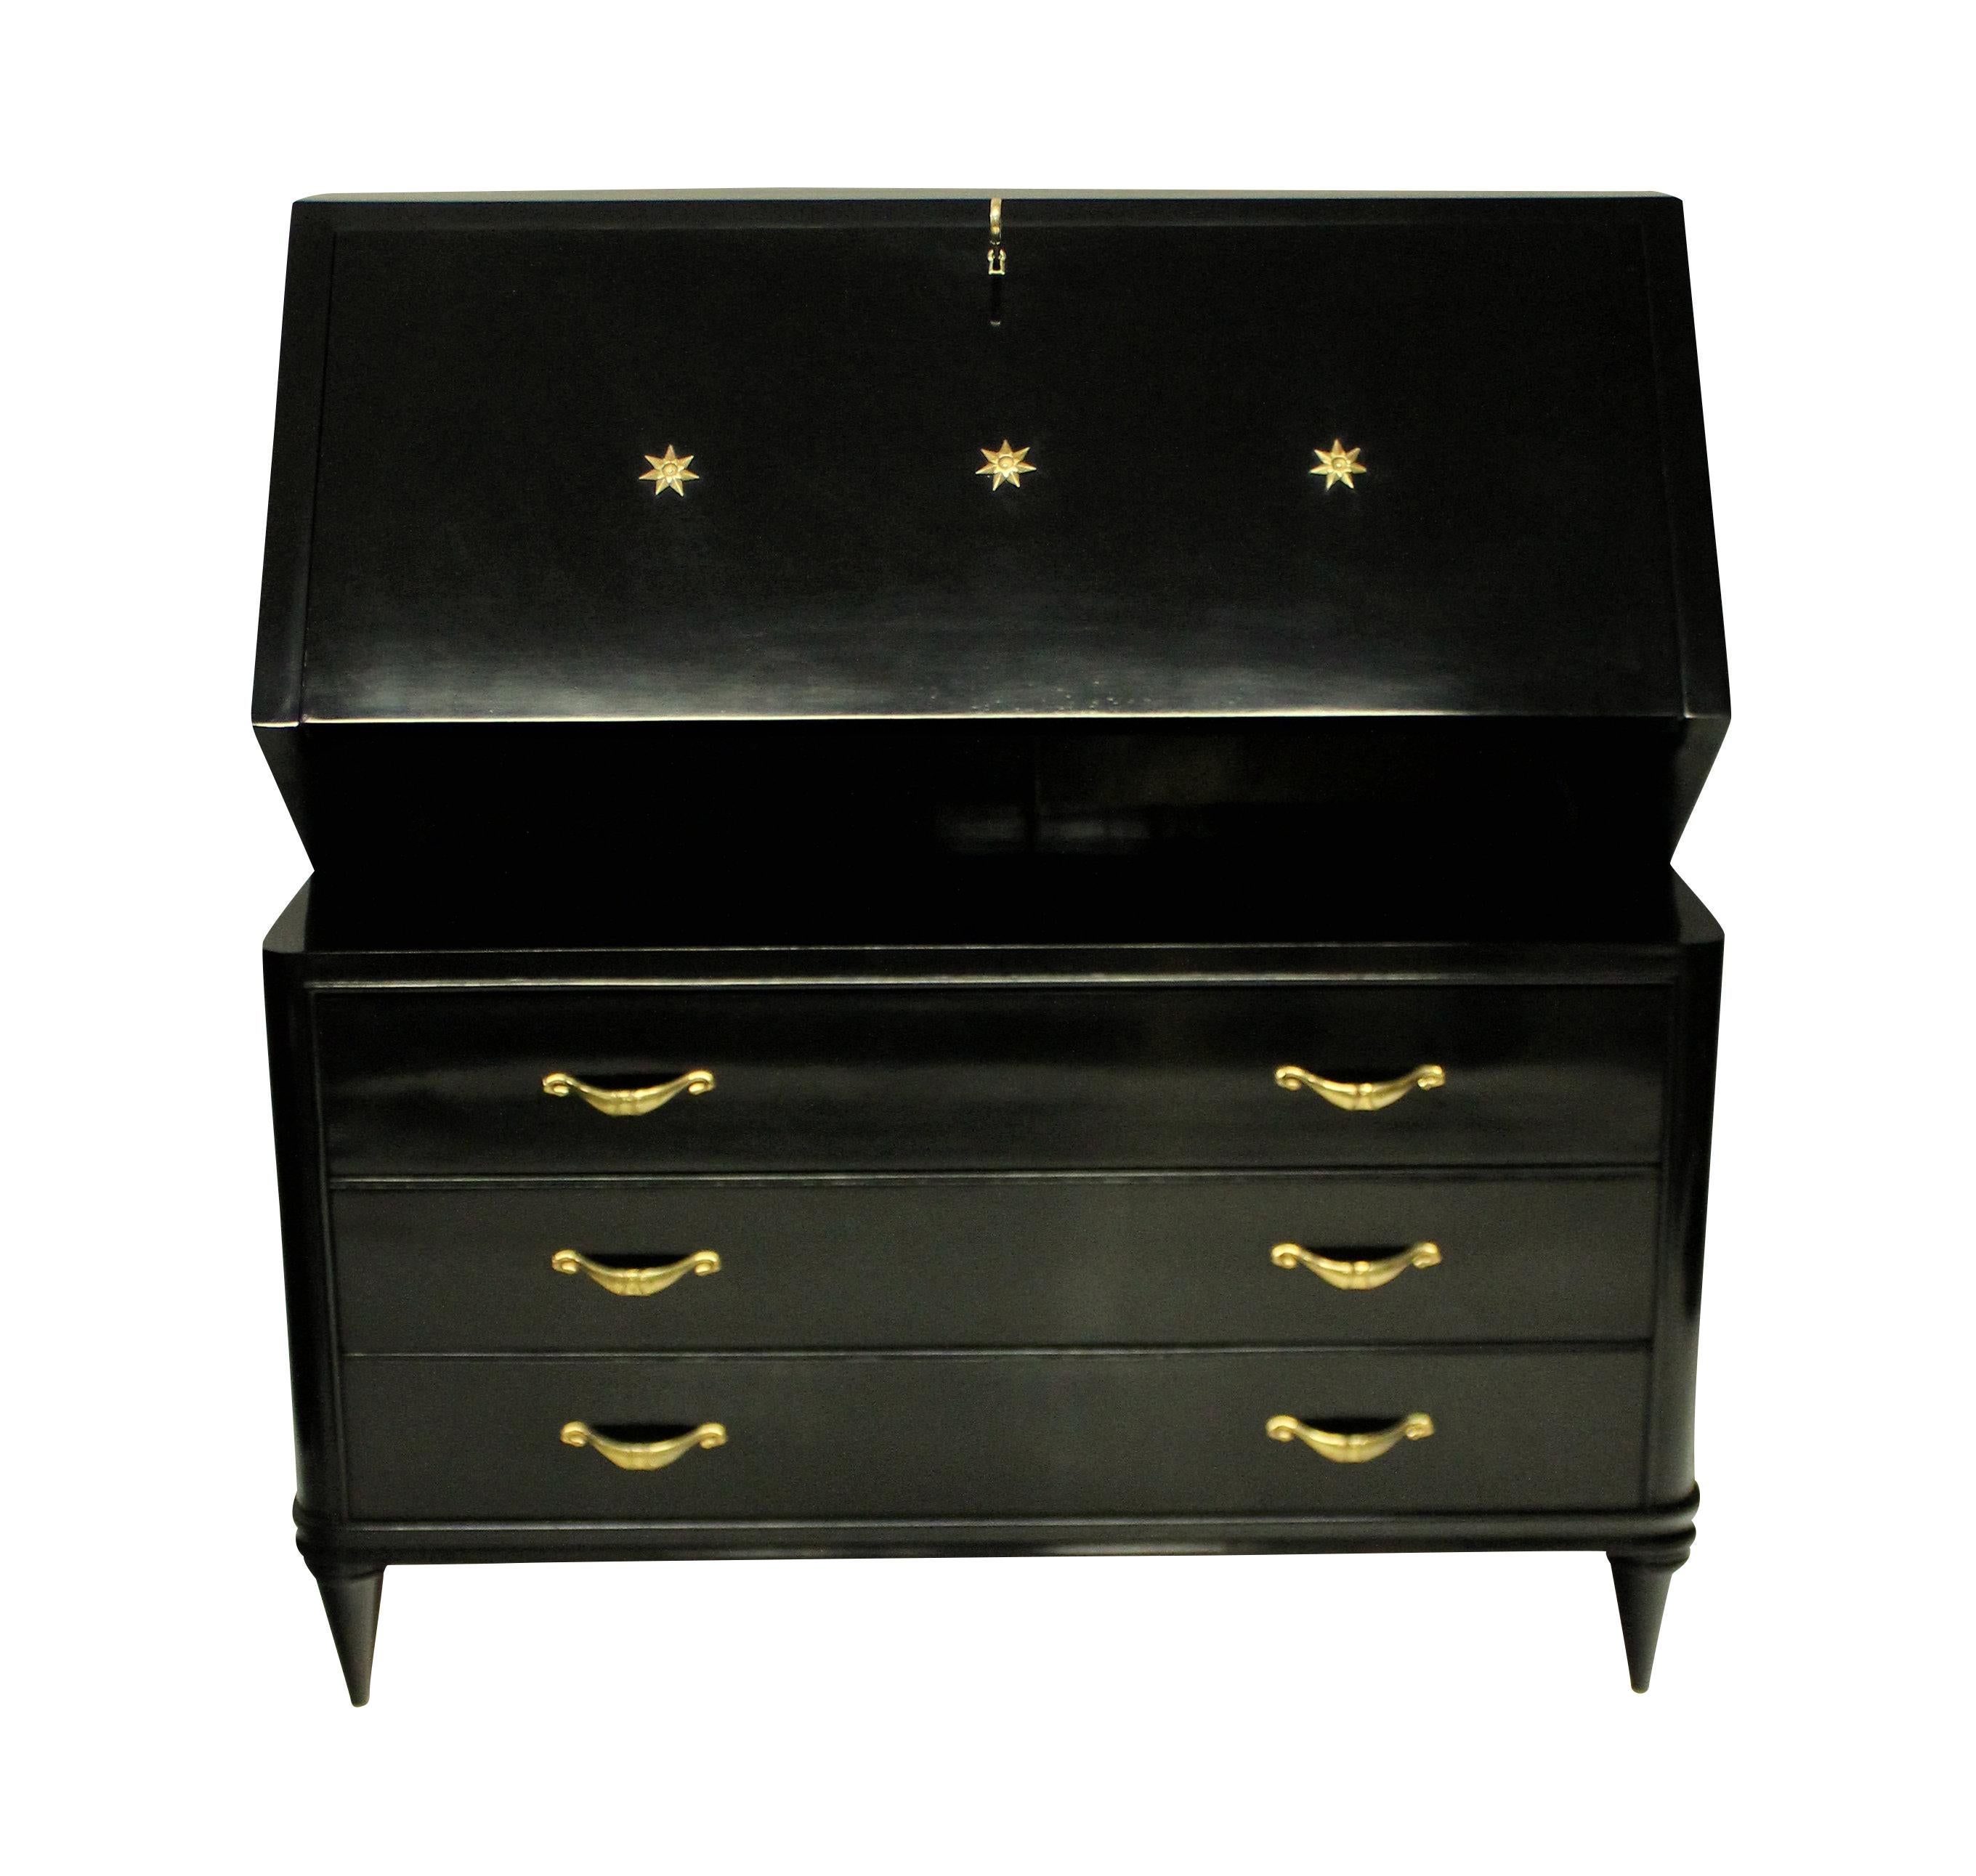 An elegant French midcentury ebonised bureau, with three drawers and a fall front desk. With swag shaped brass handles, a decorative key and star motif to the door.